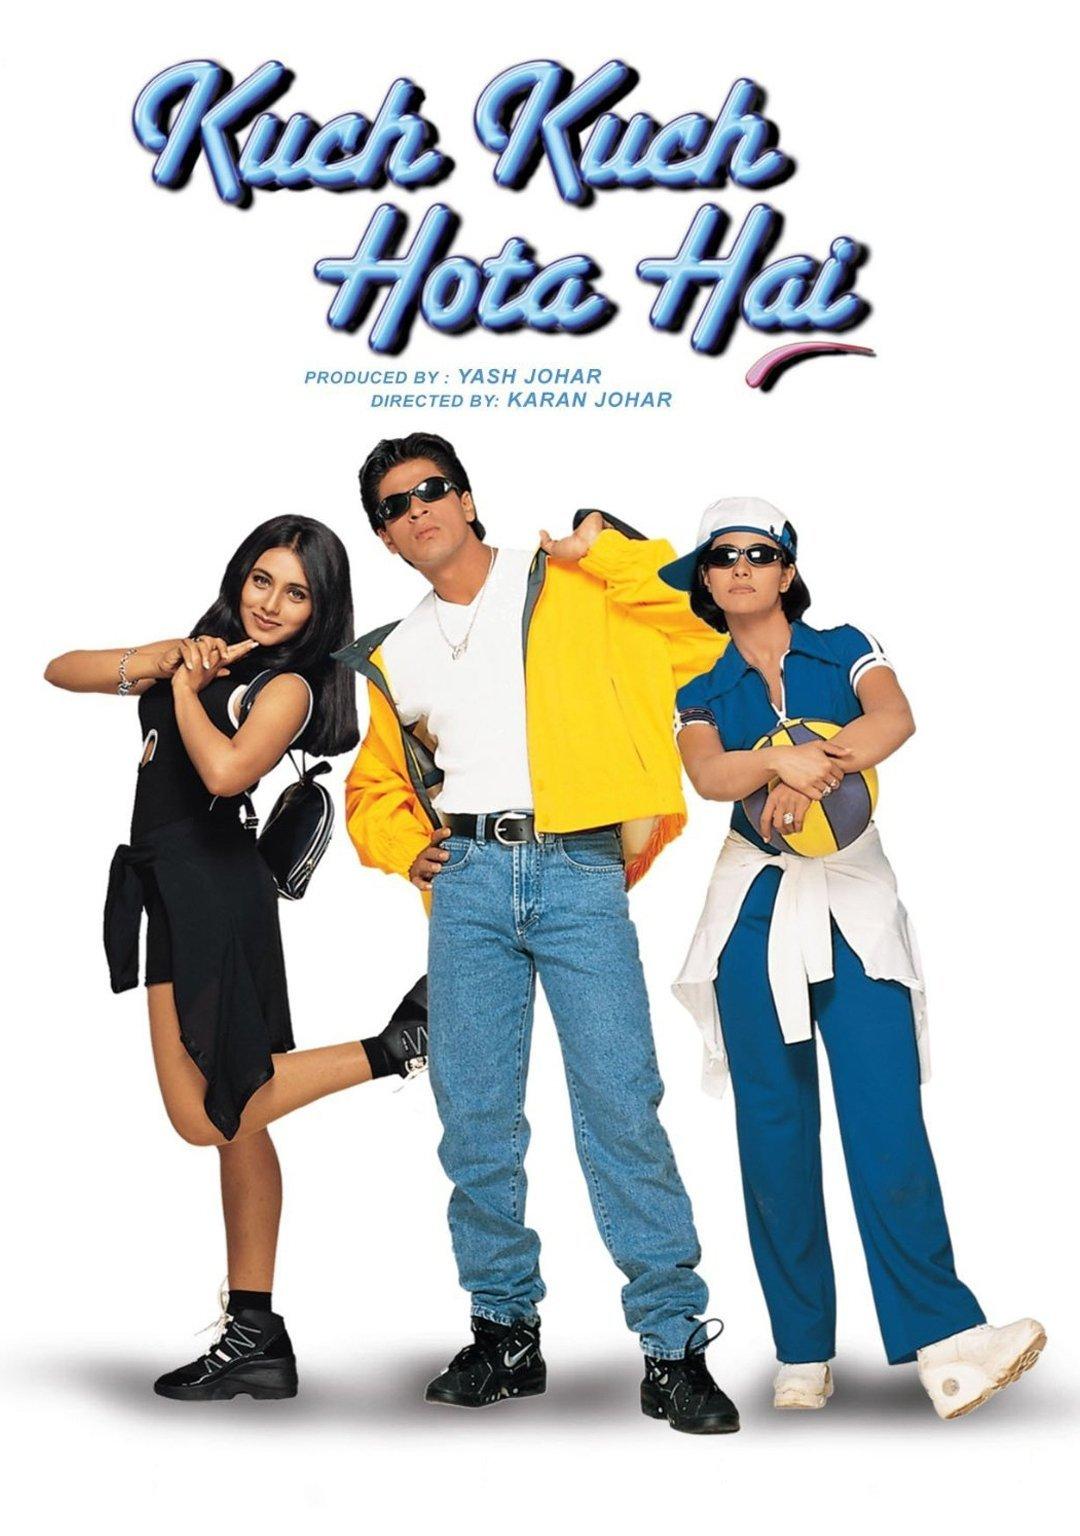 Kuch Kuch Hota Hai has its own place in the hall of fame because it gave us not one but three different kinds of fashion inspiration that would stay iconic. First, we have Anjali's iconic tomboy outfits. For the look, she was always in dungarees, covered-up jumpsuits, always accompanied by a backward cap and a wraparound jacket.